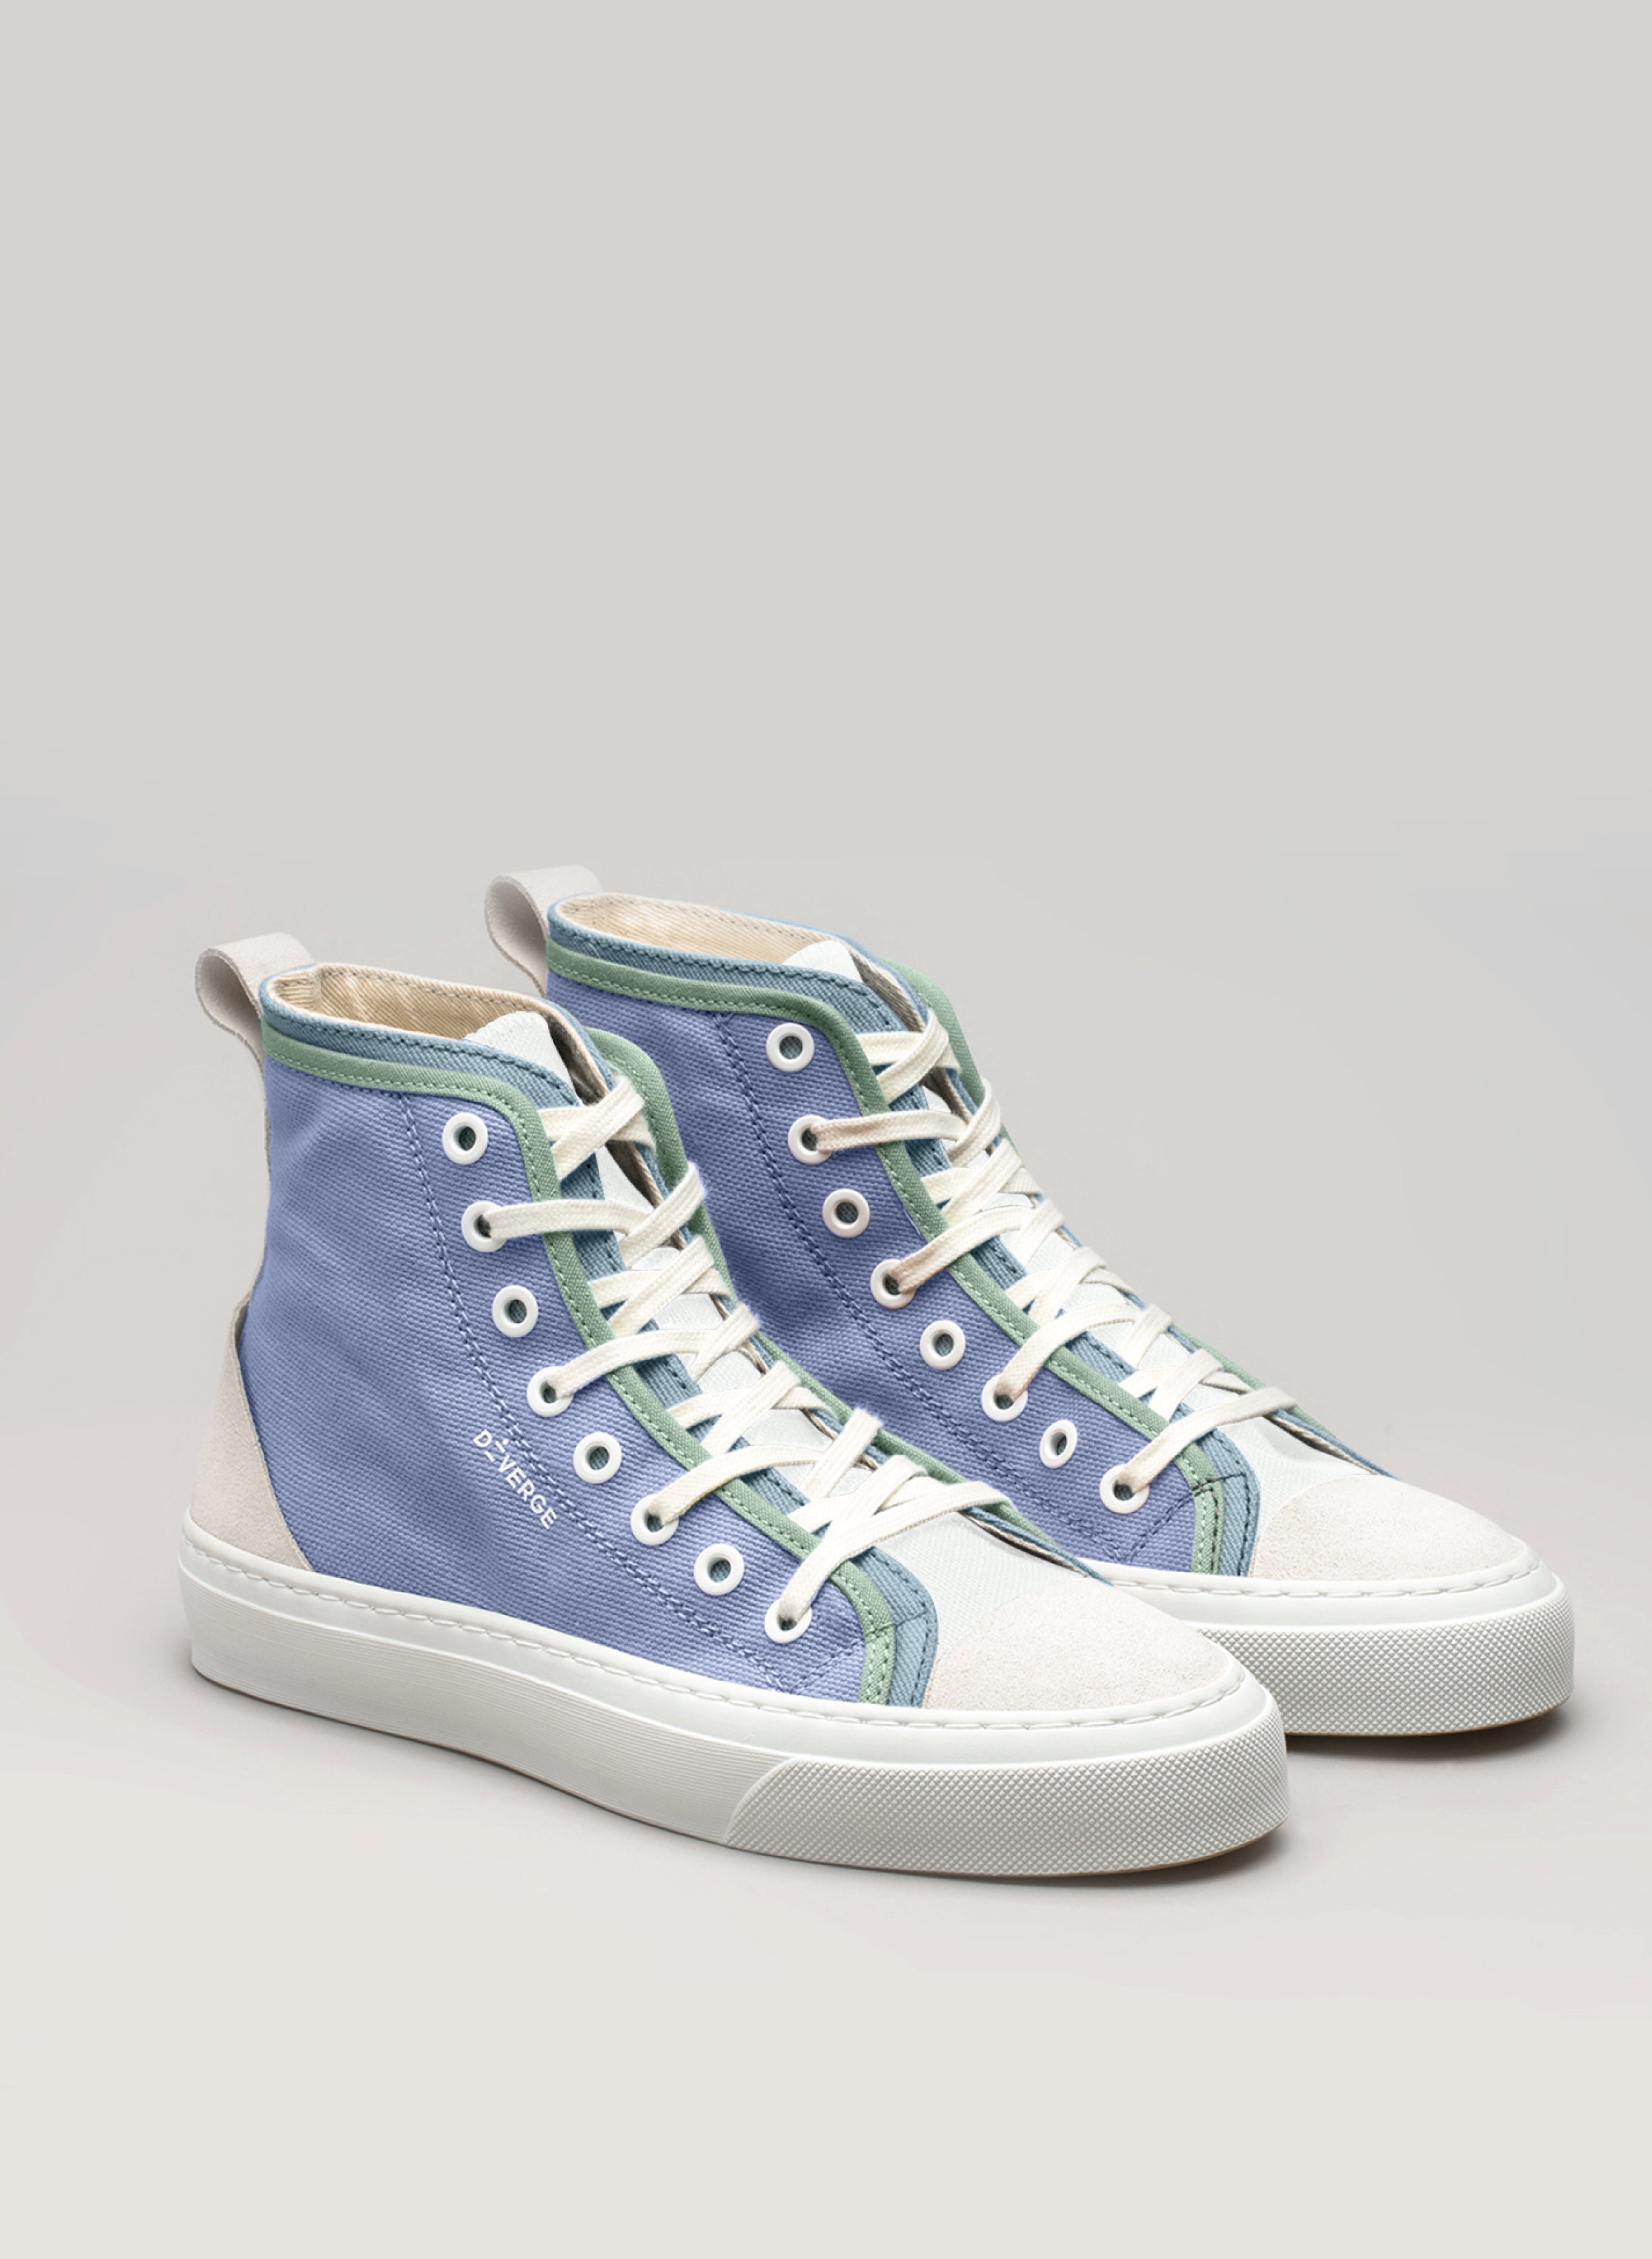 Blue and green high top Diverge sneakers with white laces, a pair of custom shoes.